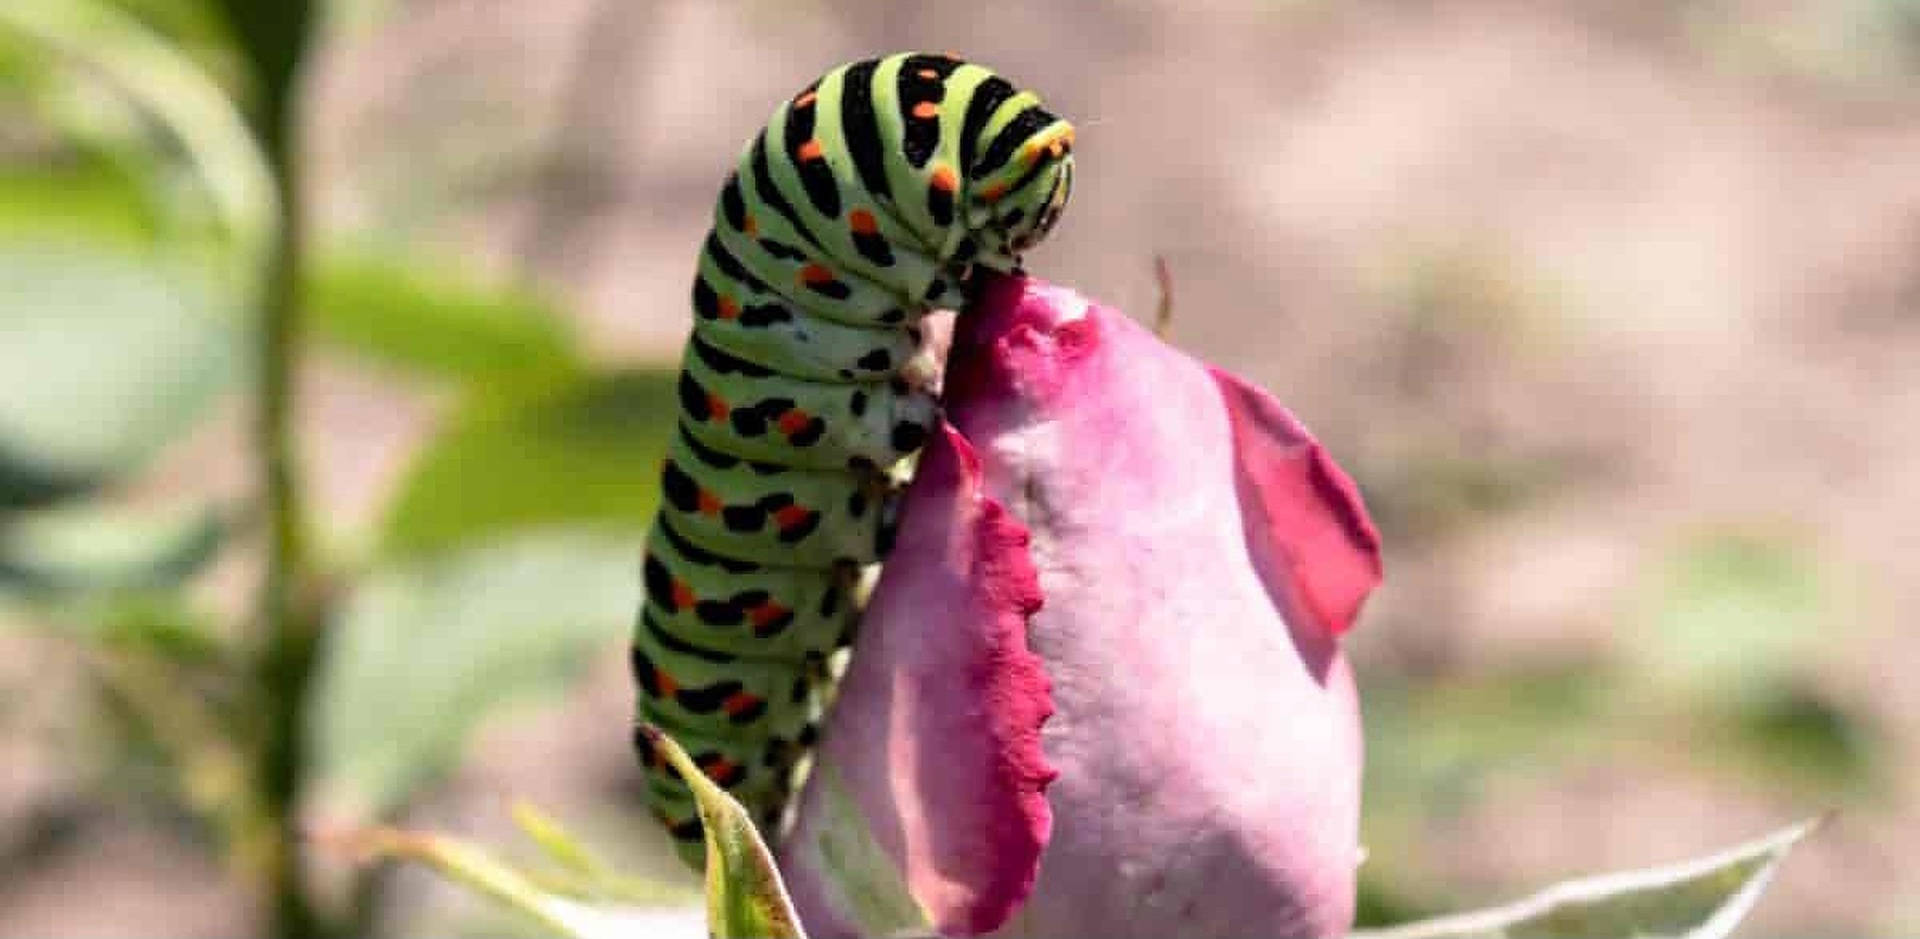 Caterpillar Insect On A Rose Bud Wallpaper